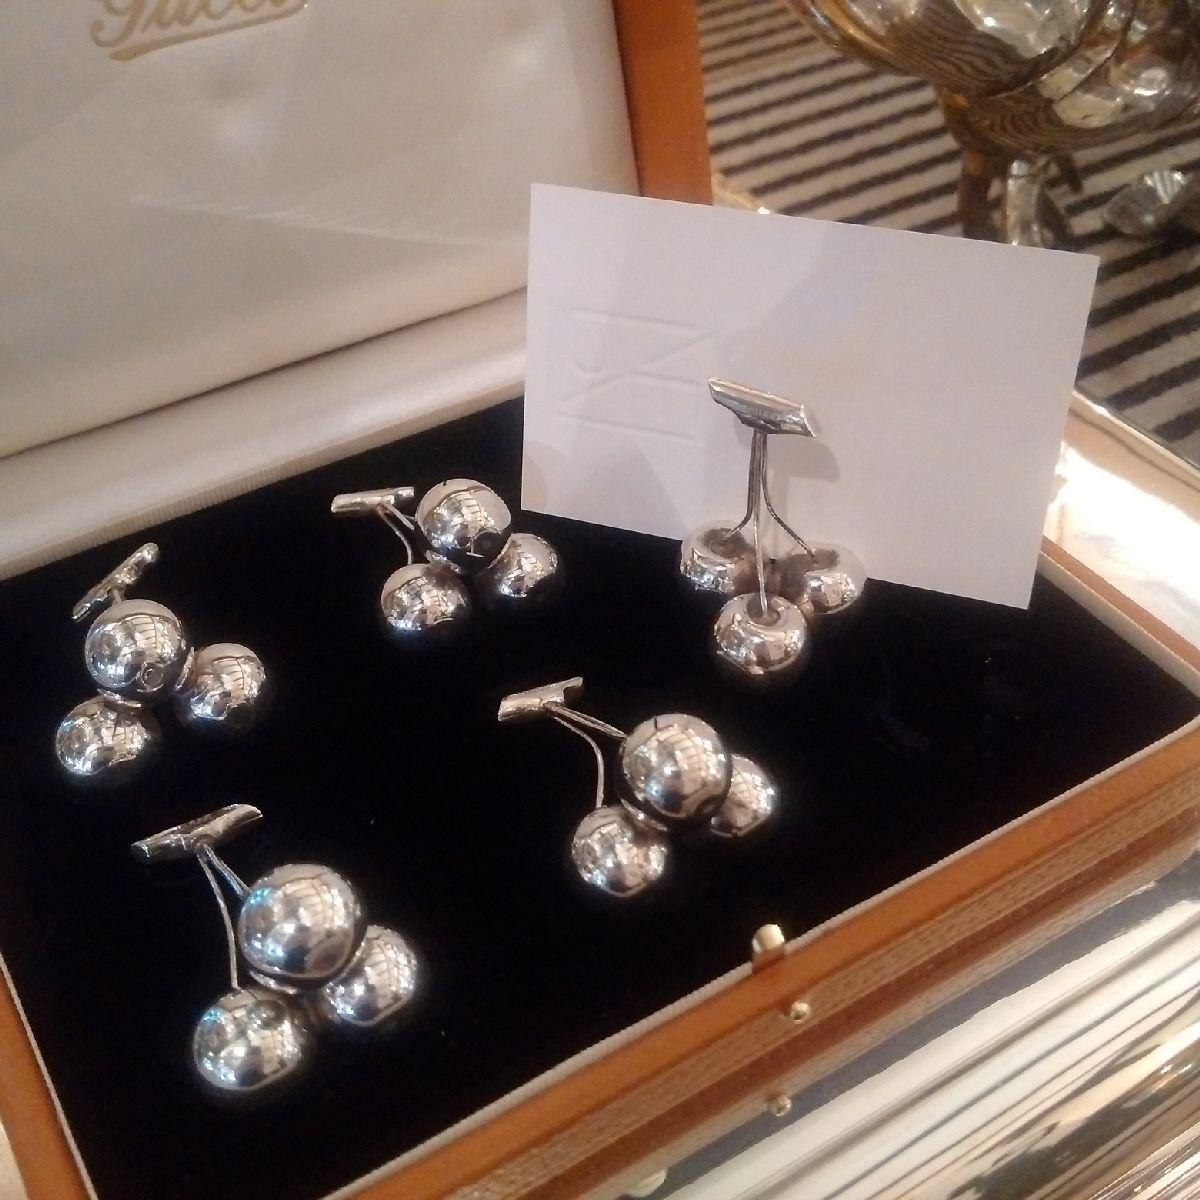 Italian 'Cherry' Sterling silver place-card or menu holders by Gucci, 1960s